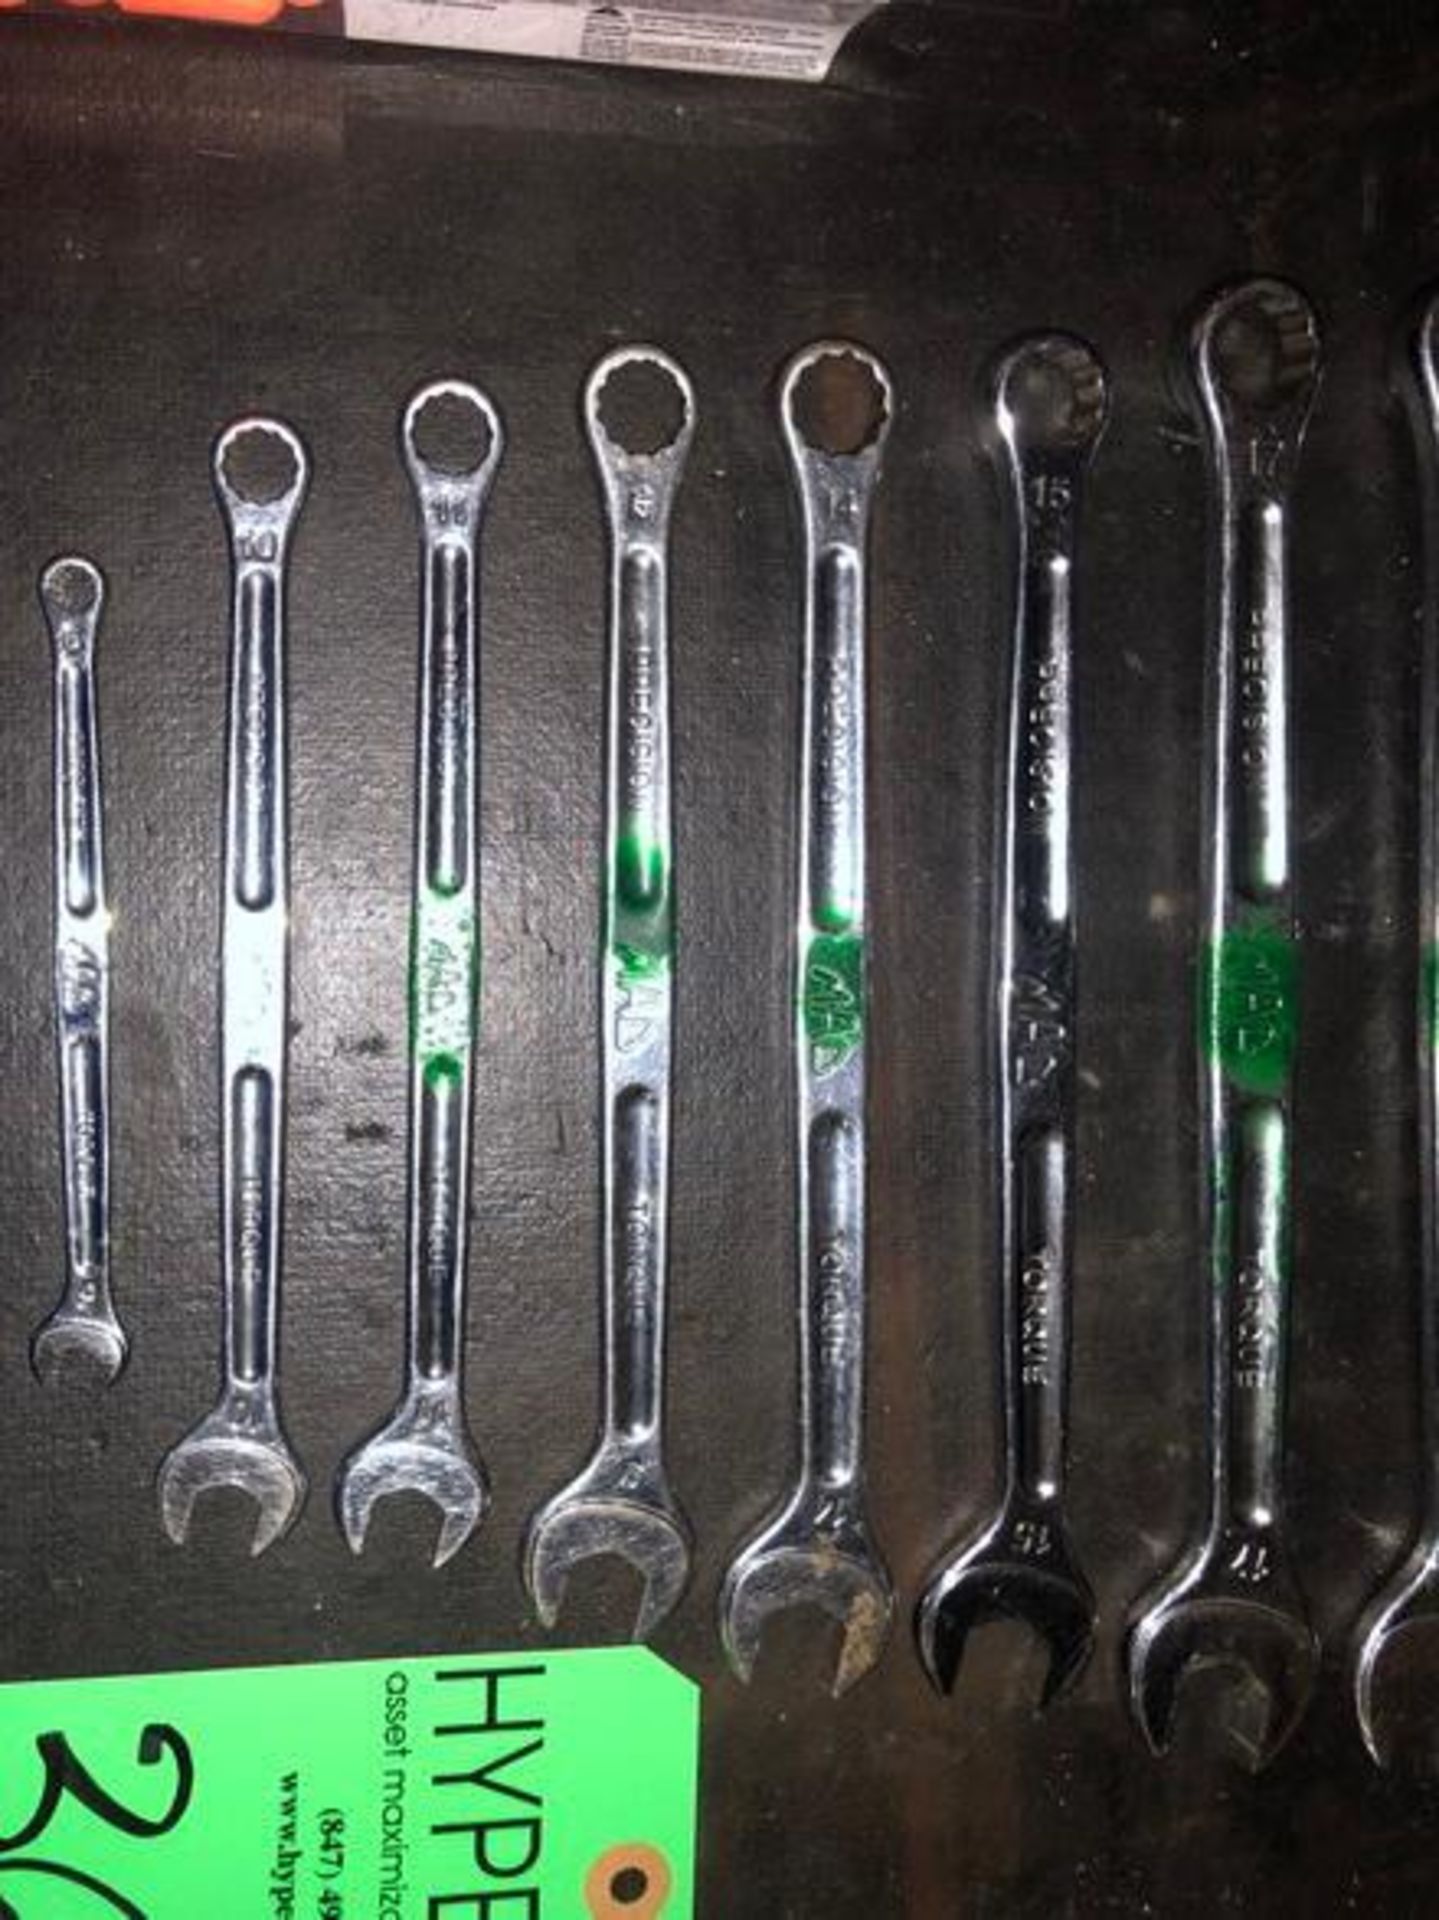 Mac 14 Piece Combination Wrench Sets - Image 4 of 5